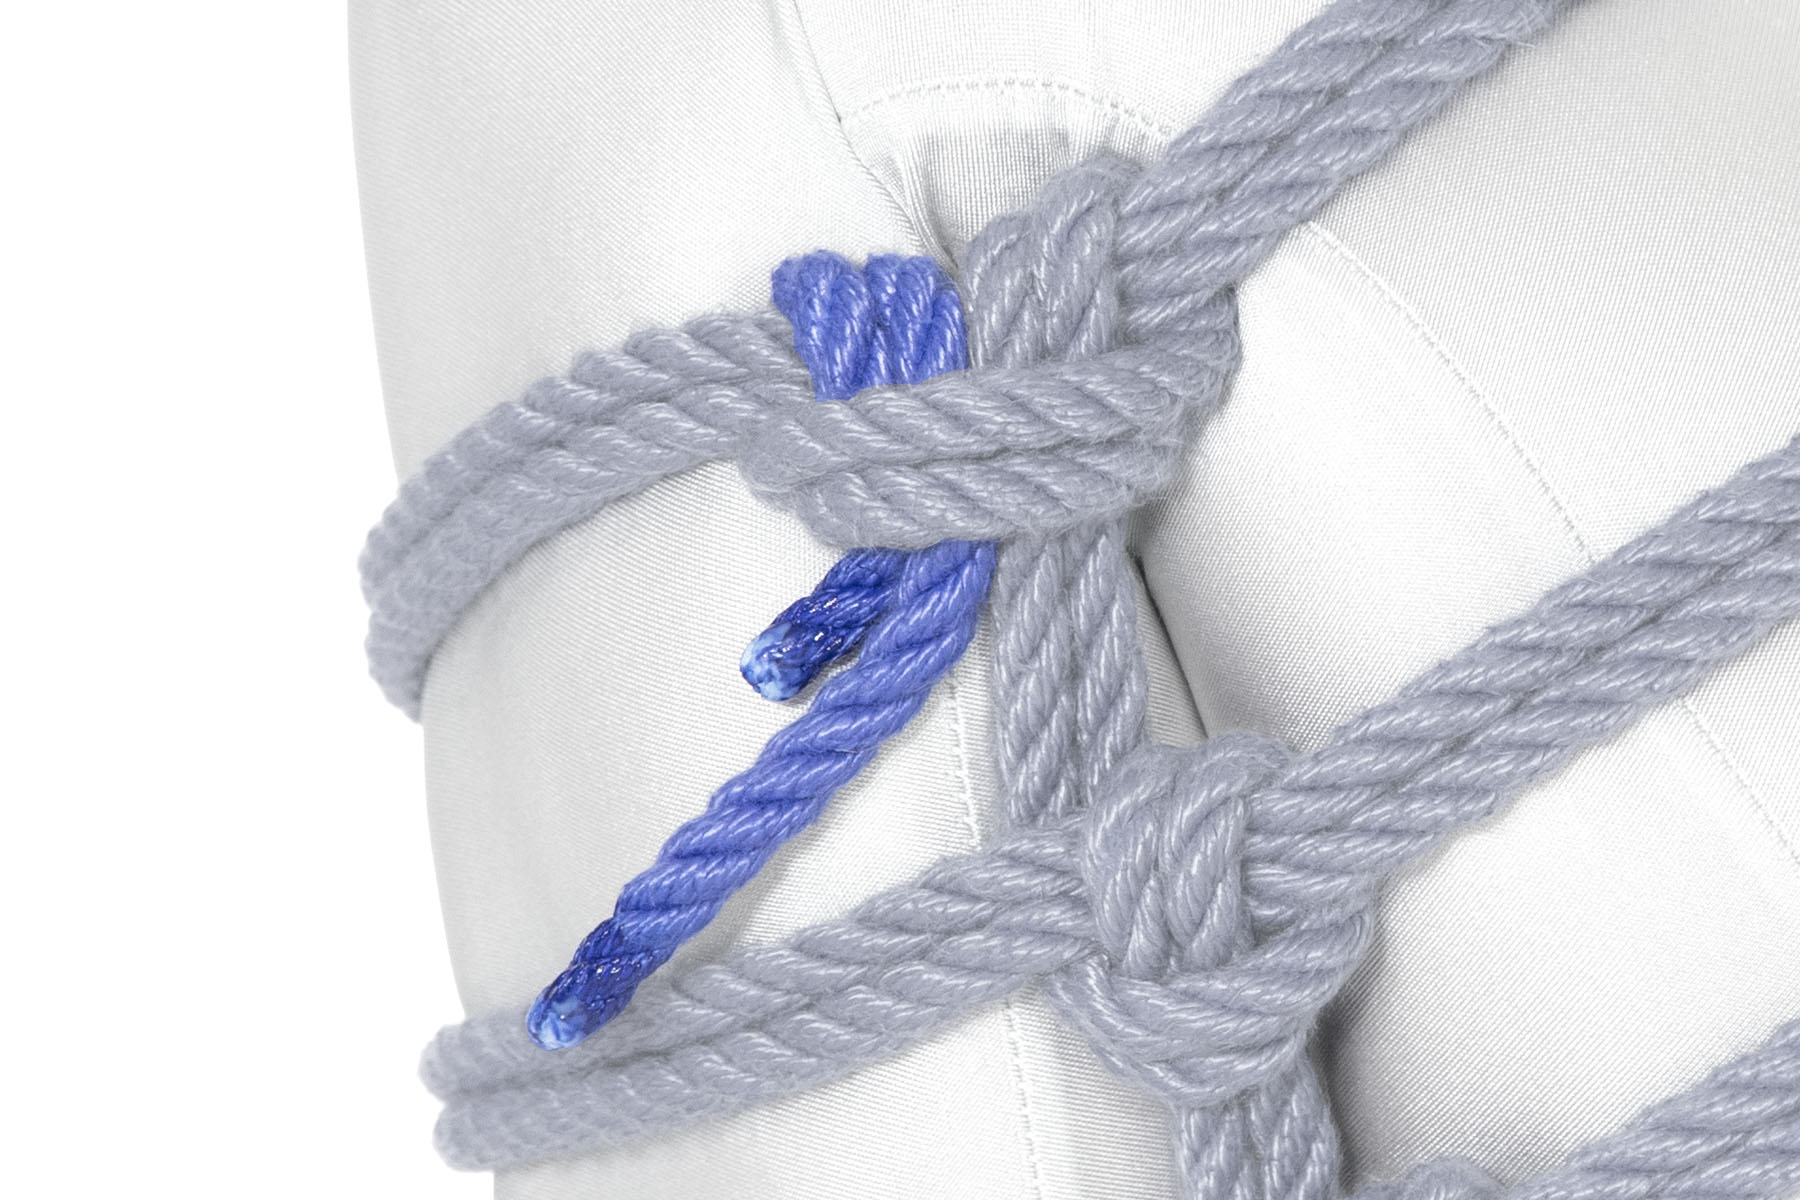 The rope makes a half hitch after the final Munter, securing itself to the upper wrap.